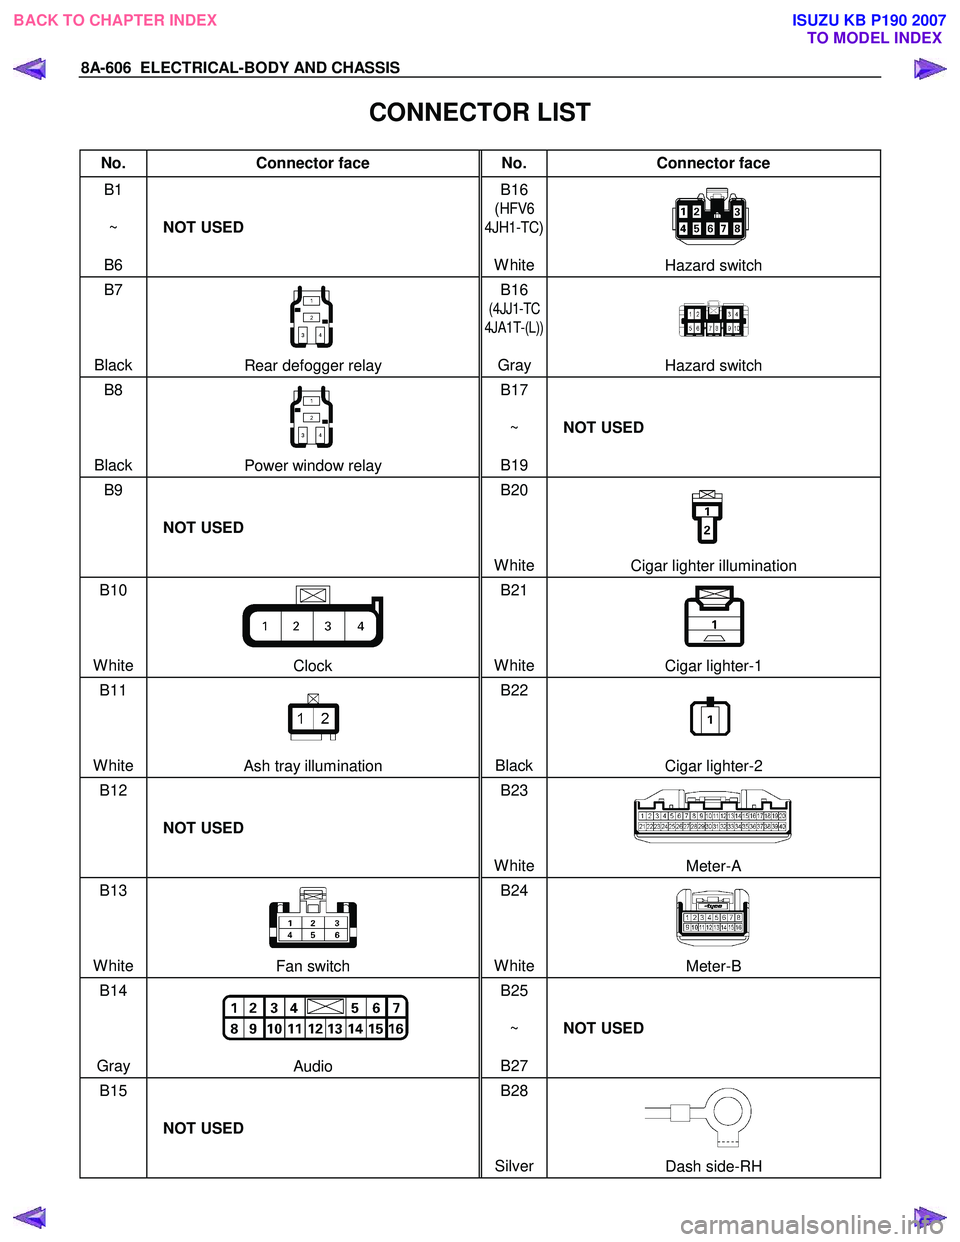 ISUZU KB P190 2007  Workshop Owners Manual 8A-606  ELECTRICAL-BODY AND CHASSIS 
 
CONNECTOR LIST 
No. Connector face  No. Connector face 
B1 
 
~   
B6  NOT USED  B16 
(
HFV6 
4JH1-TC
)
 
White
Hazard switch 
B7    
 
 
Black 
Rear defogger re